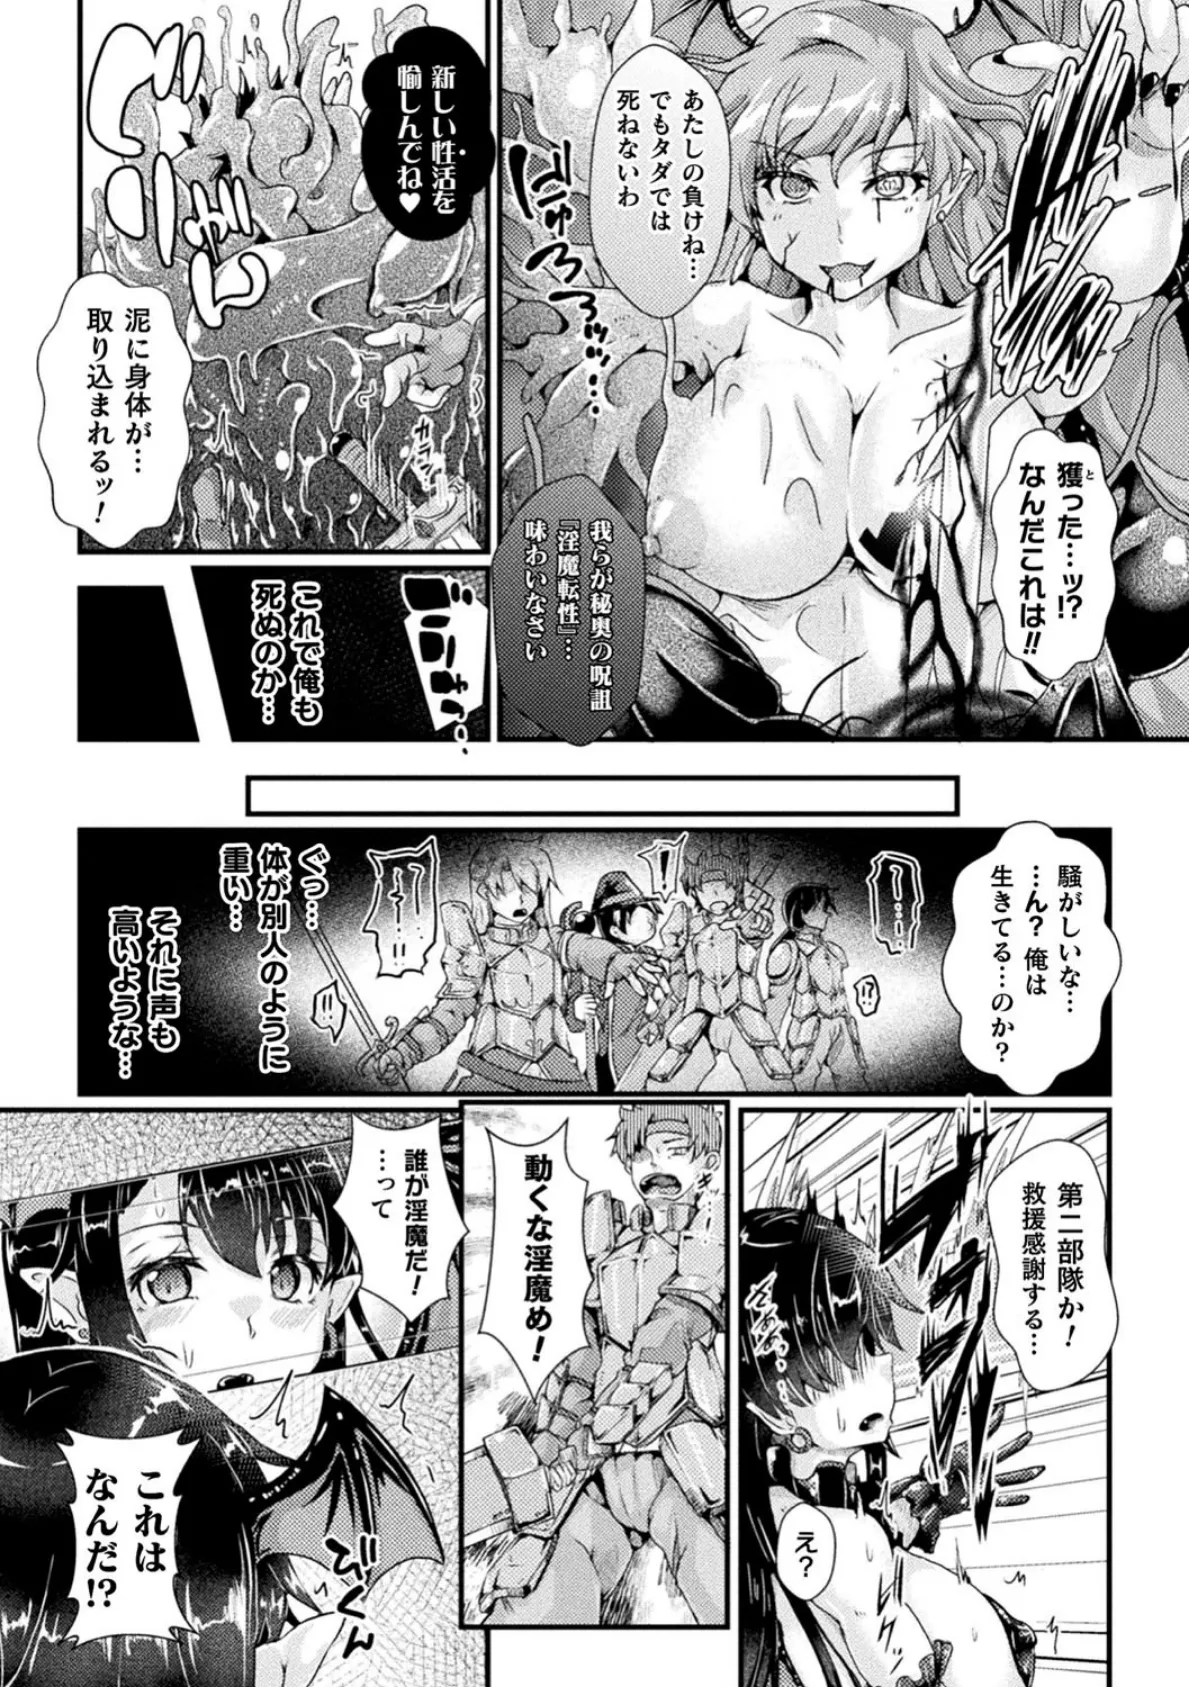 Corrupted Maiden 〜淫欲に堕ちる戦姫たち〜【電子書籍限定版】 24ページ